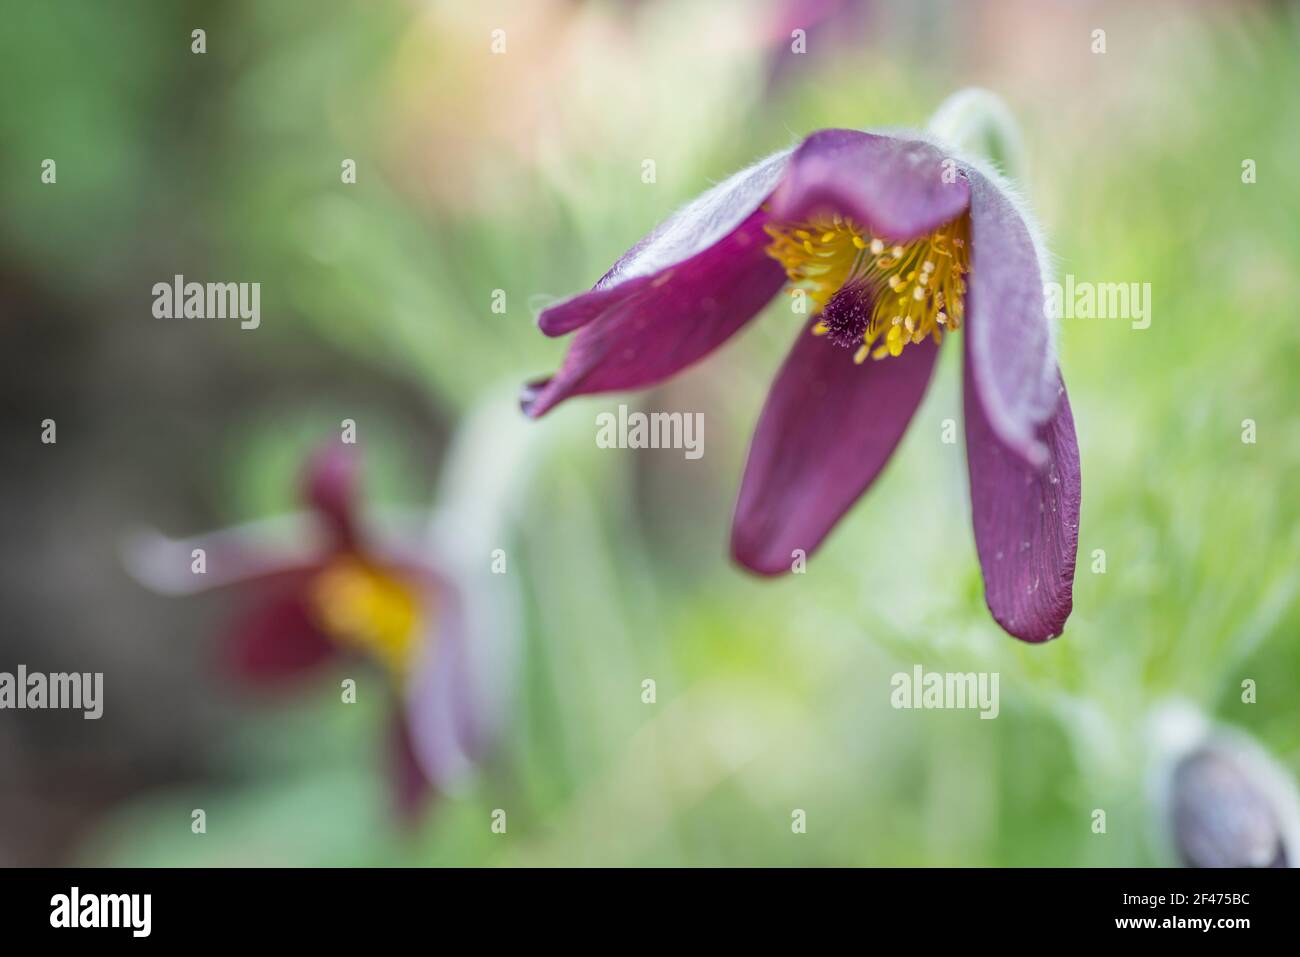 Pasque flower | Dilston Physic Garden | May 2016 Stock Photo